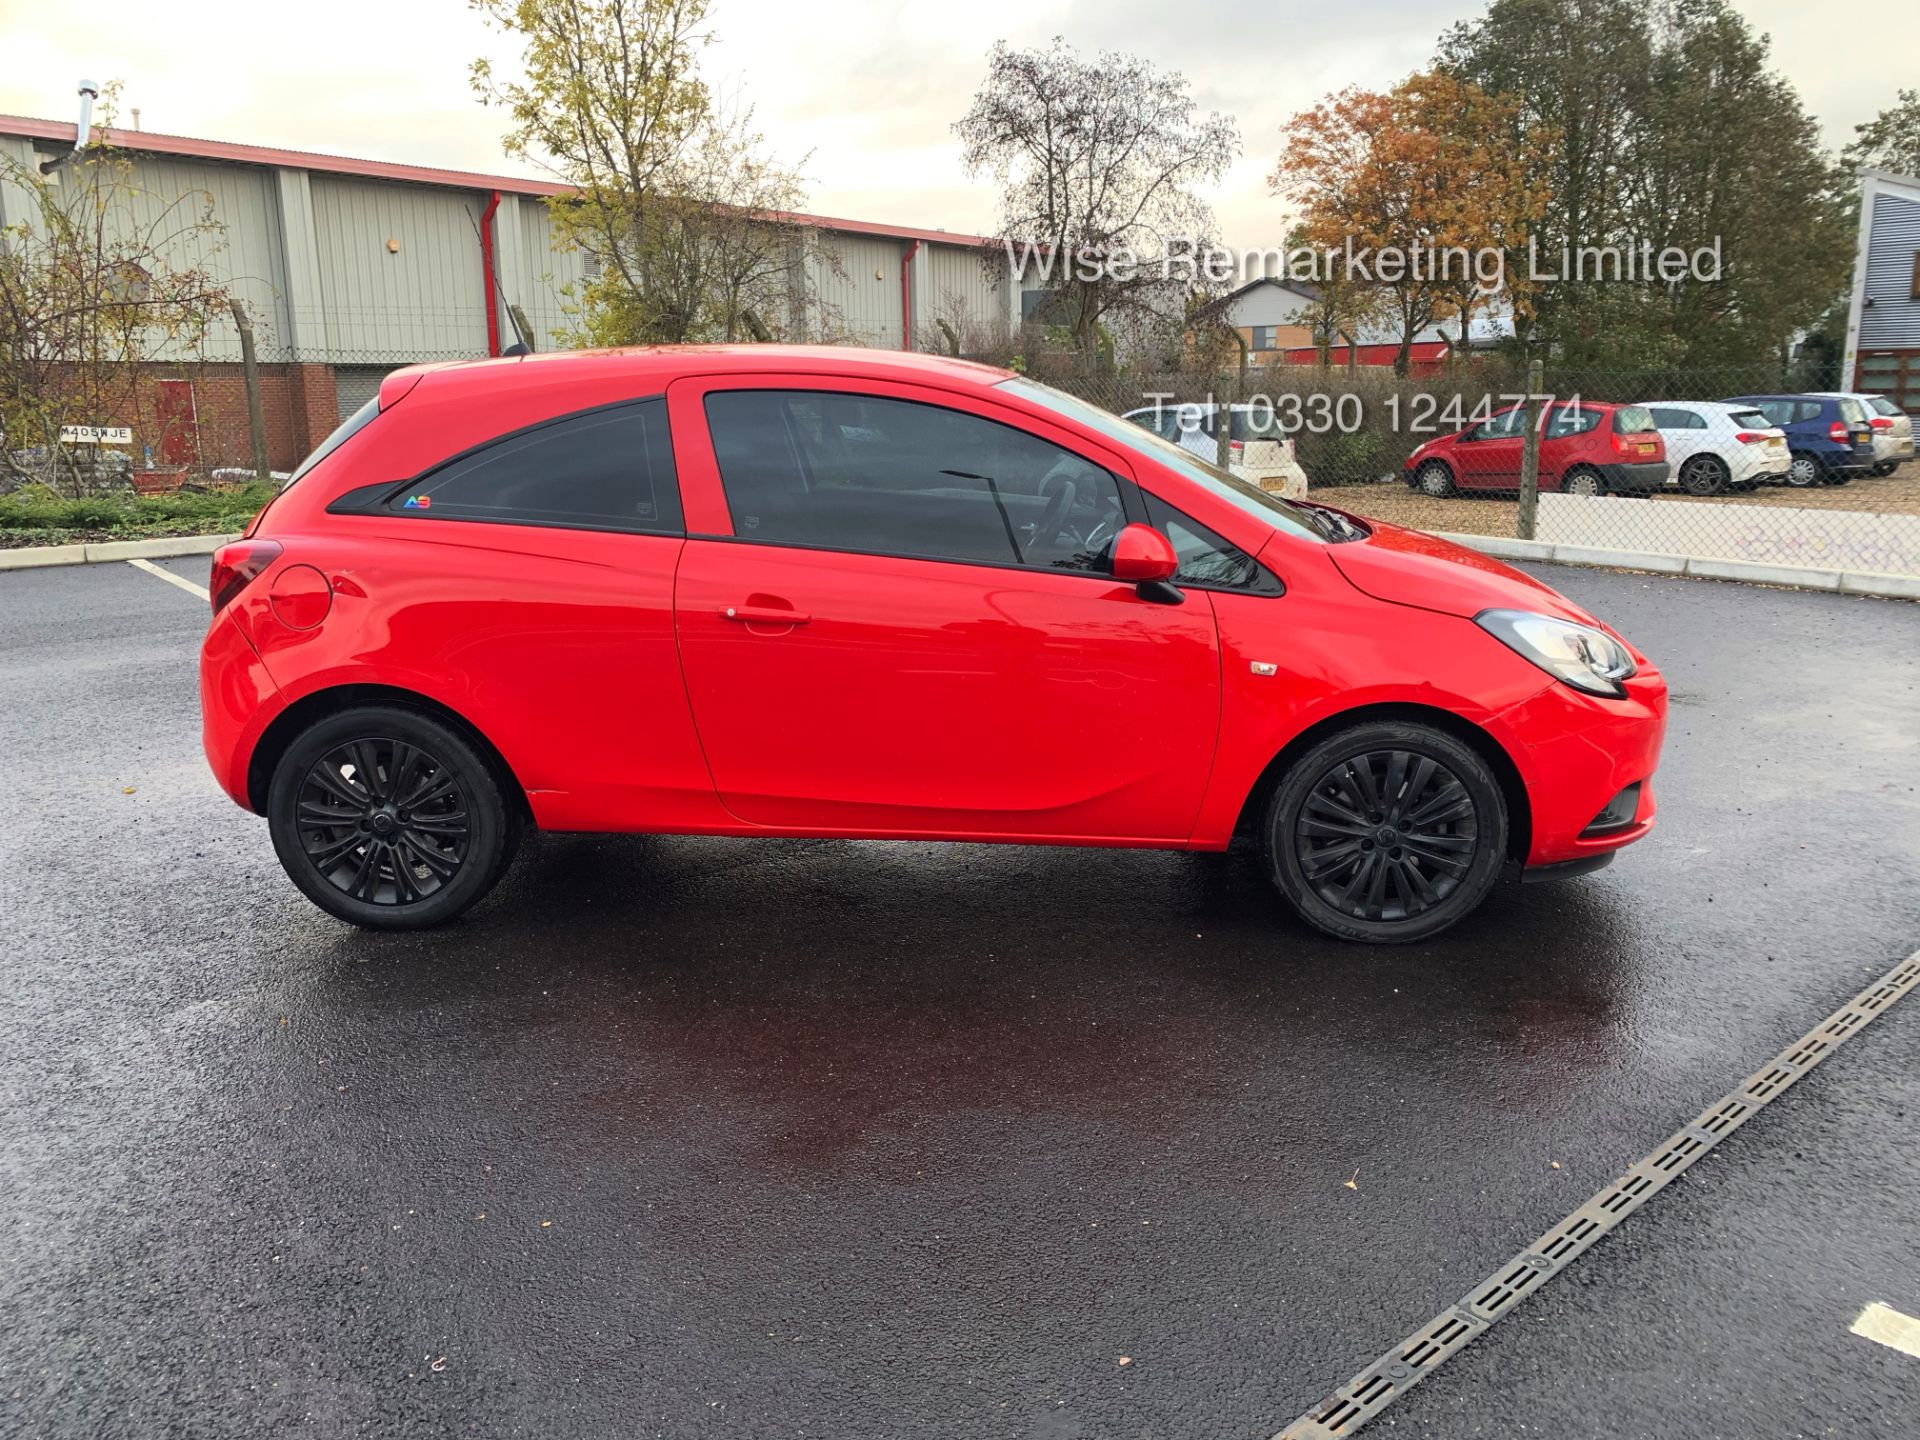 Vauxhall Corsa 1.4 Turbo Excite AC Ecoflex - 2015 15 Reg - Heated Seats - Touch Screen **TOP SPEC** - Image 7 of 22